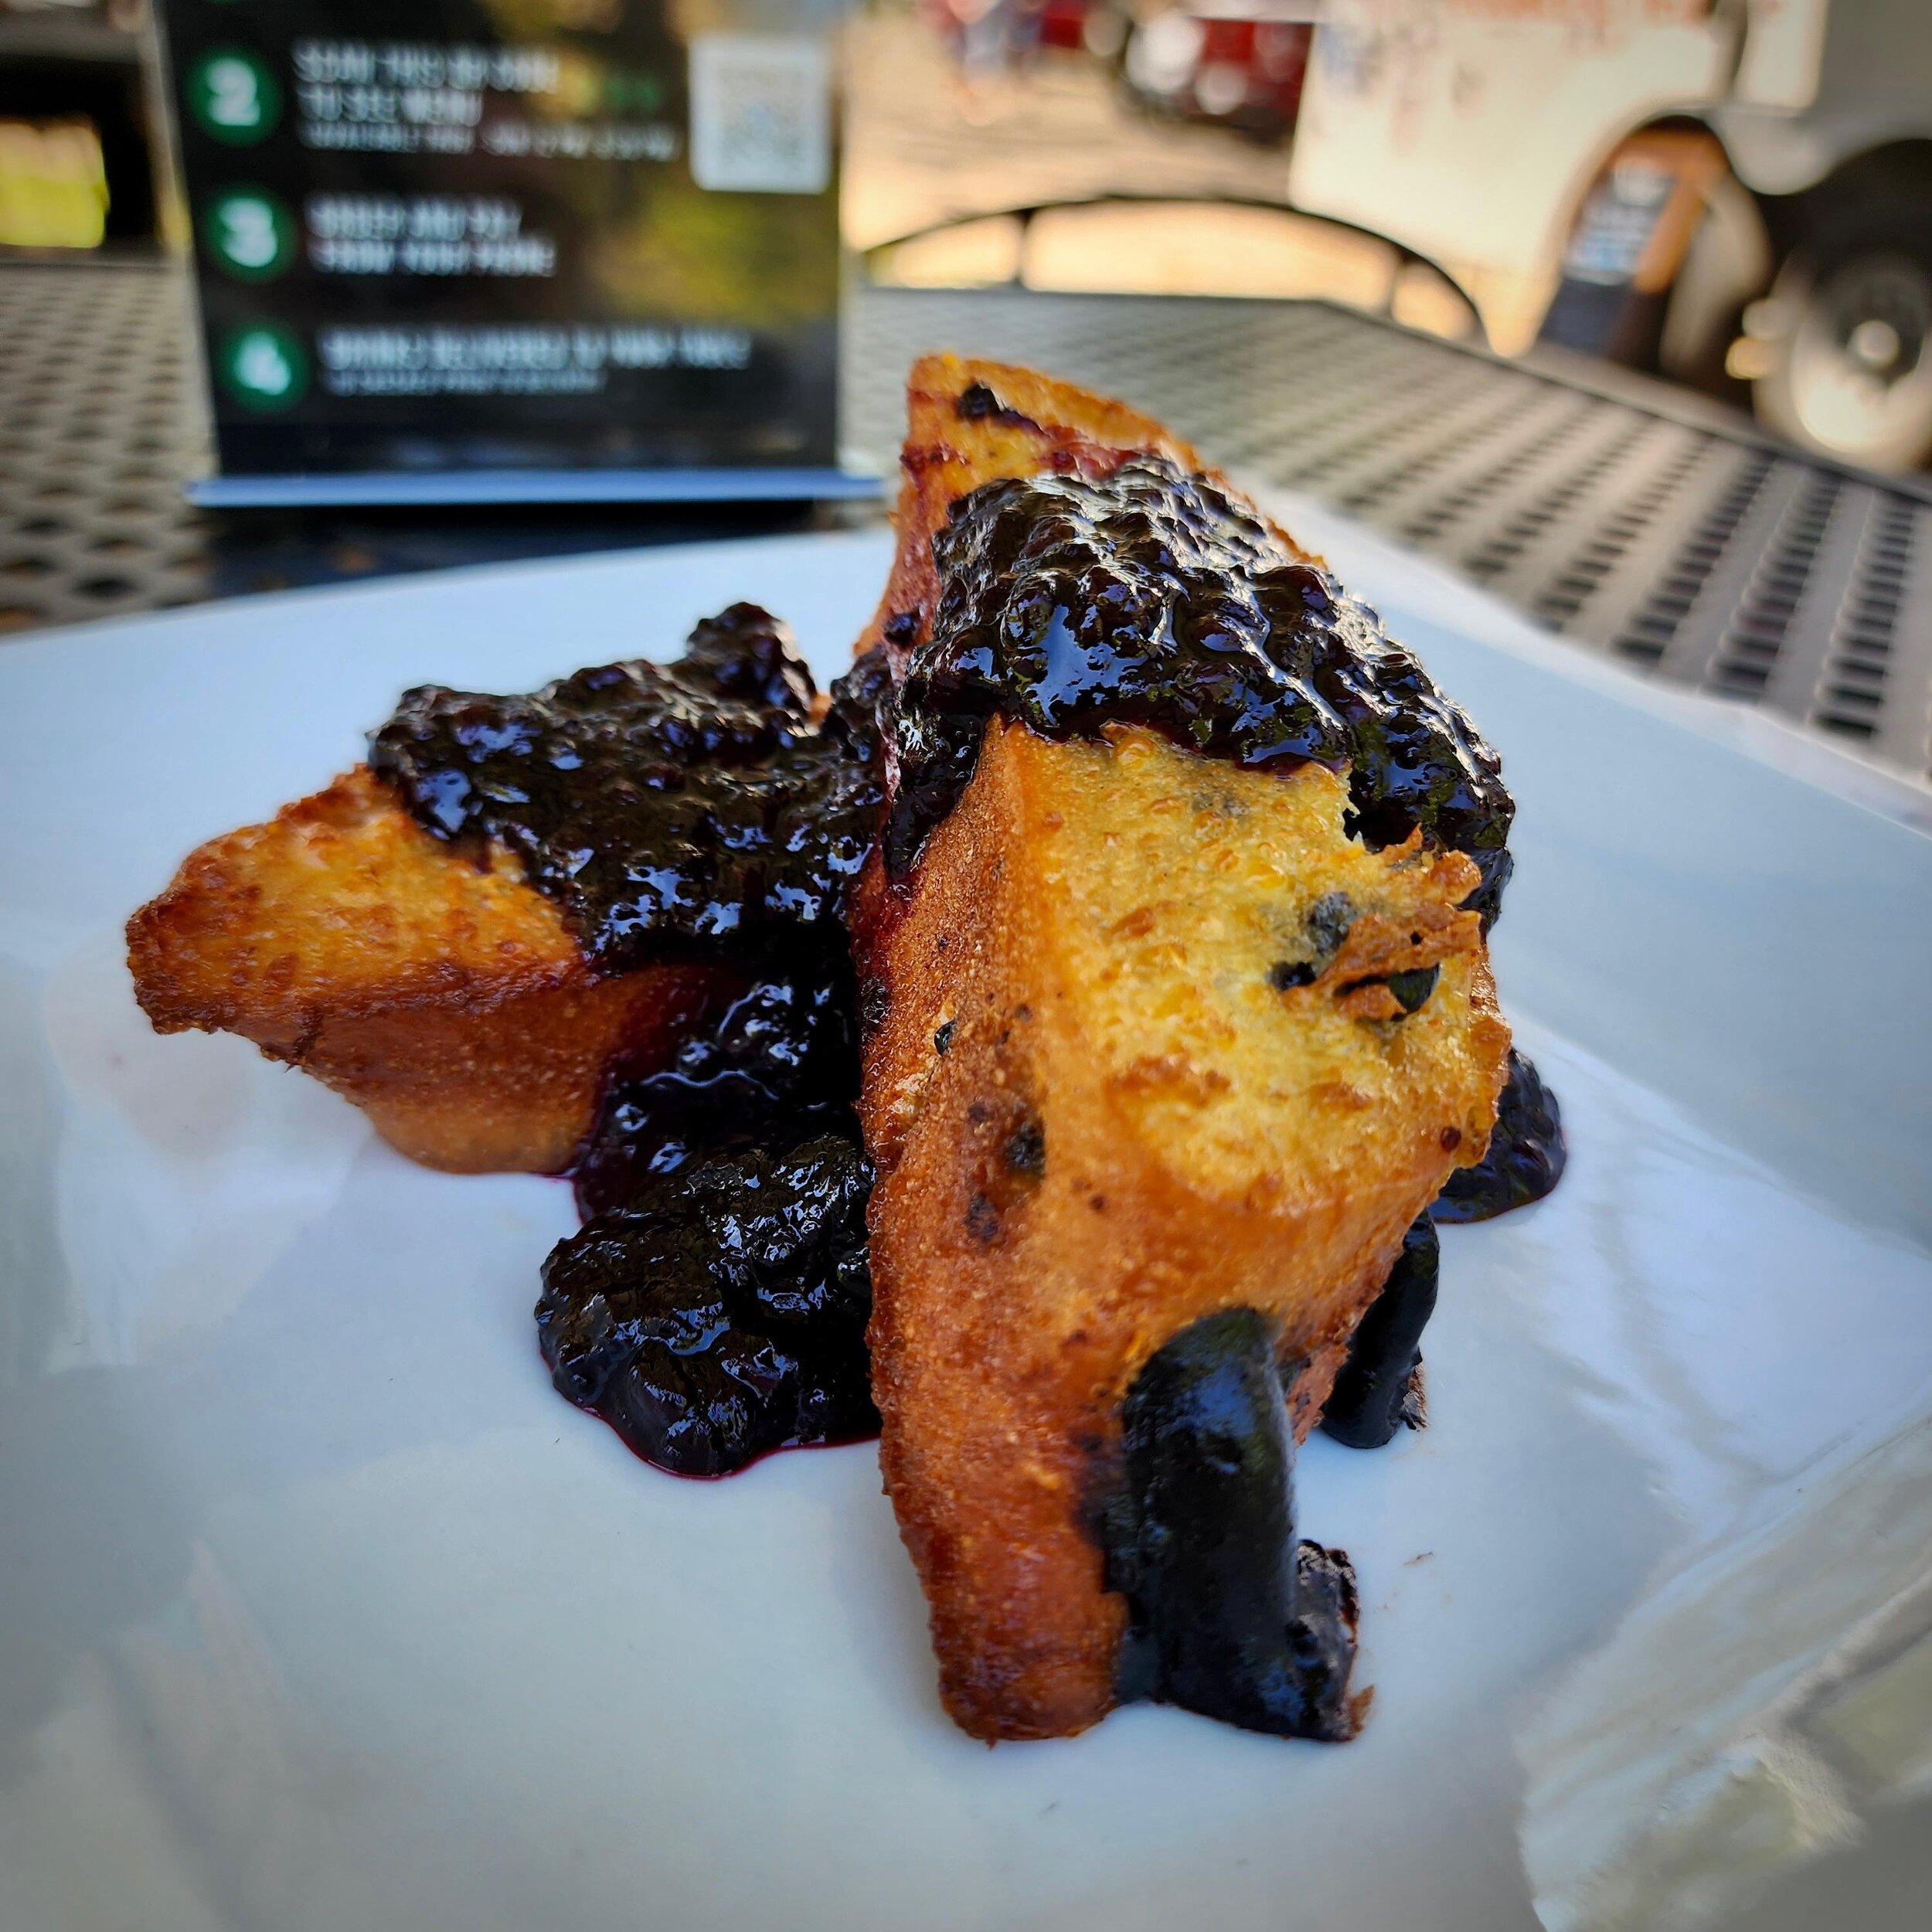 ✨Total Eclipse of My French Toast✨
🎶Once upon a time there was light in my life, but now there&rsquo;s only French Toast in the dark this week&rsquo;s special is our Total Eclipse of My French Toast🎶 French toast stuffed with a black cocoa custard 